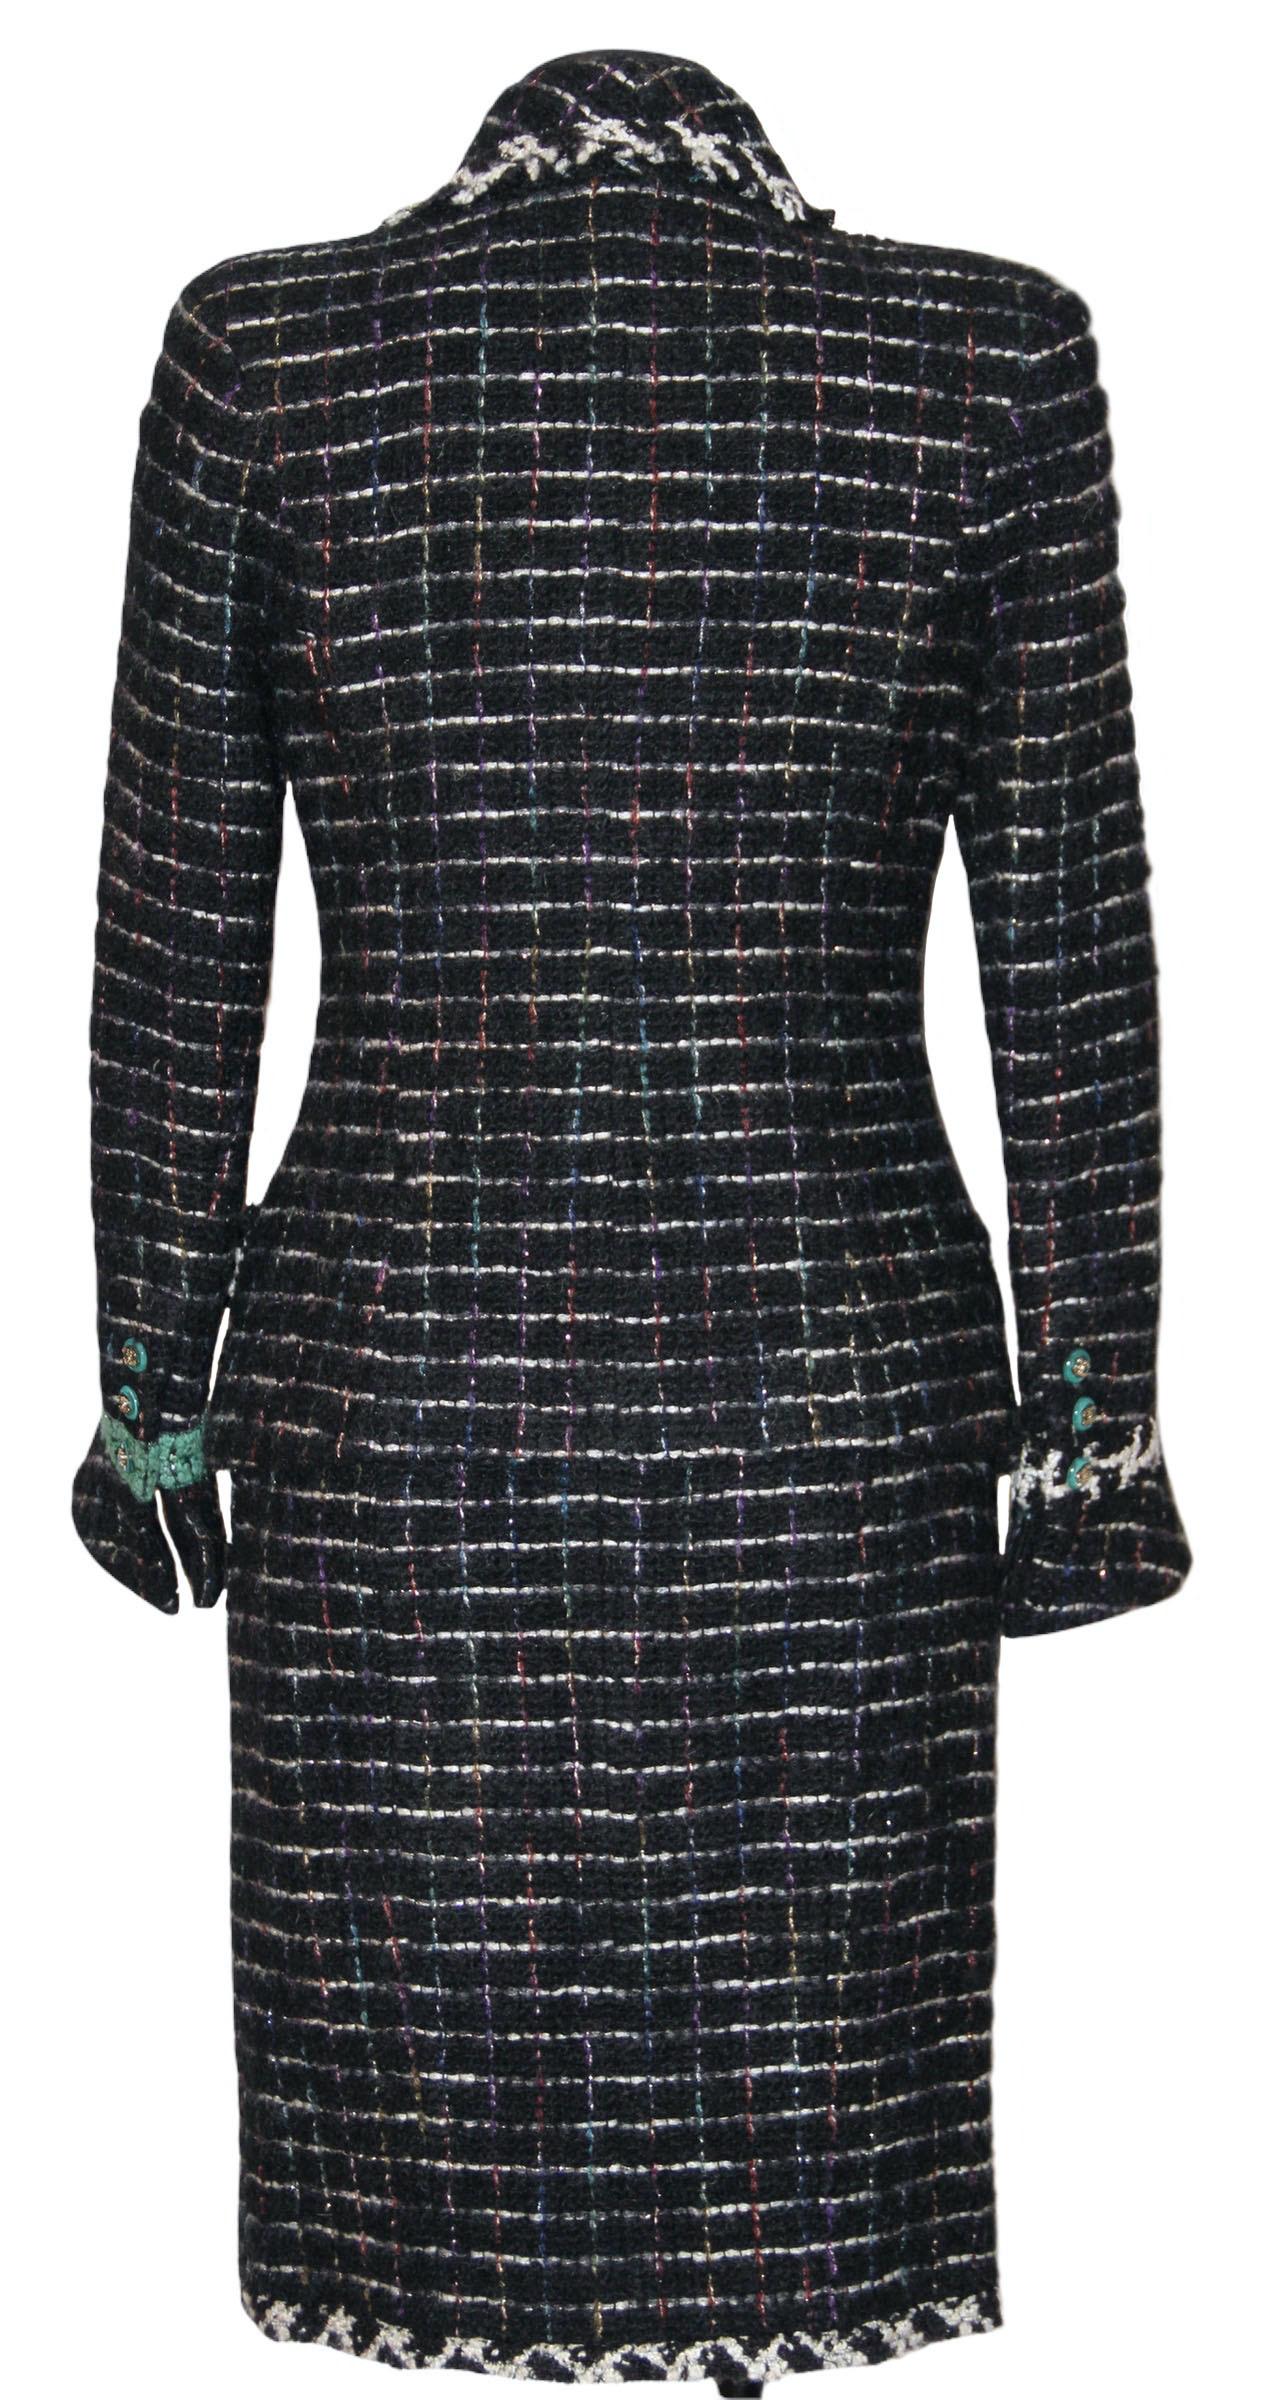 In perfect condition, this pre-owned Chanel suit is crafted in a beautiful black and white wool mix tartan pattern tweed. 
The jacket is double breasted finished with 10 green CC buttons and 2 pockets - one green, one black/white.
Each sleeve has 3x